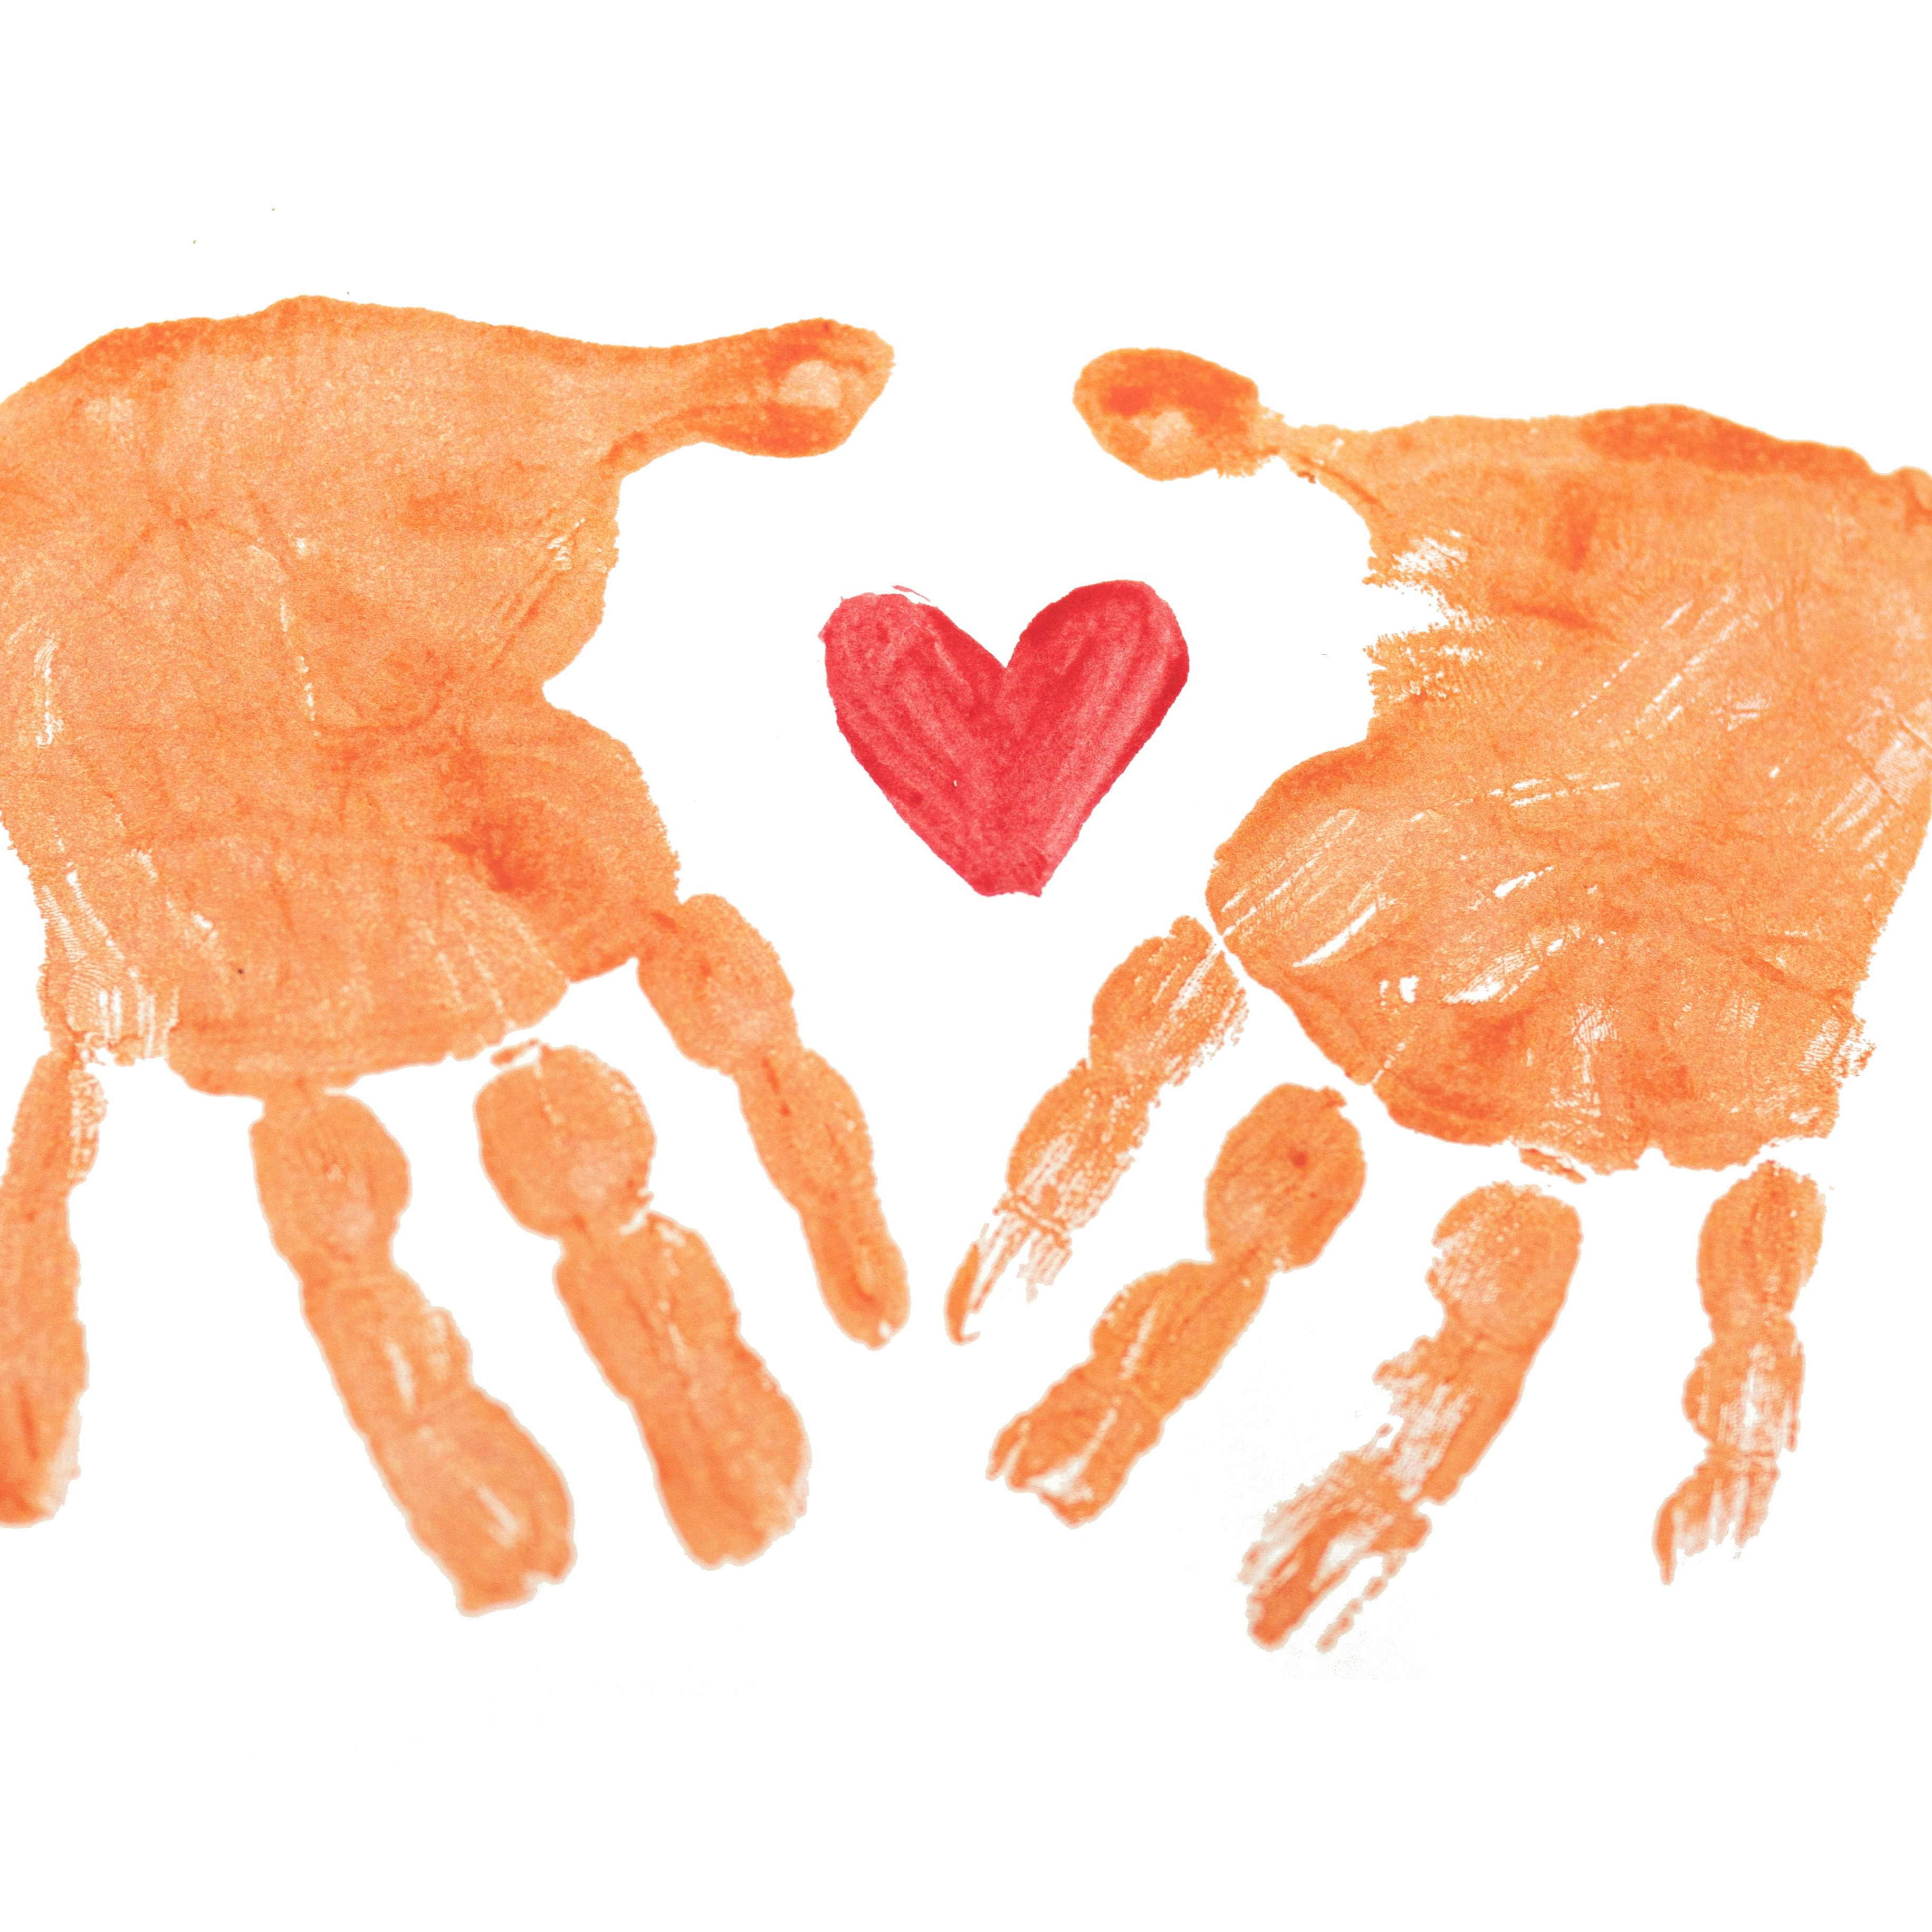 hand painted hands with heart in center